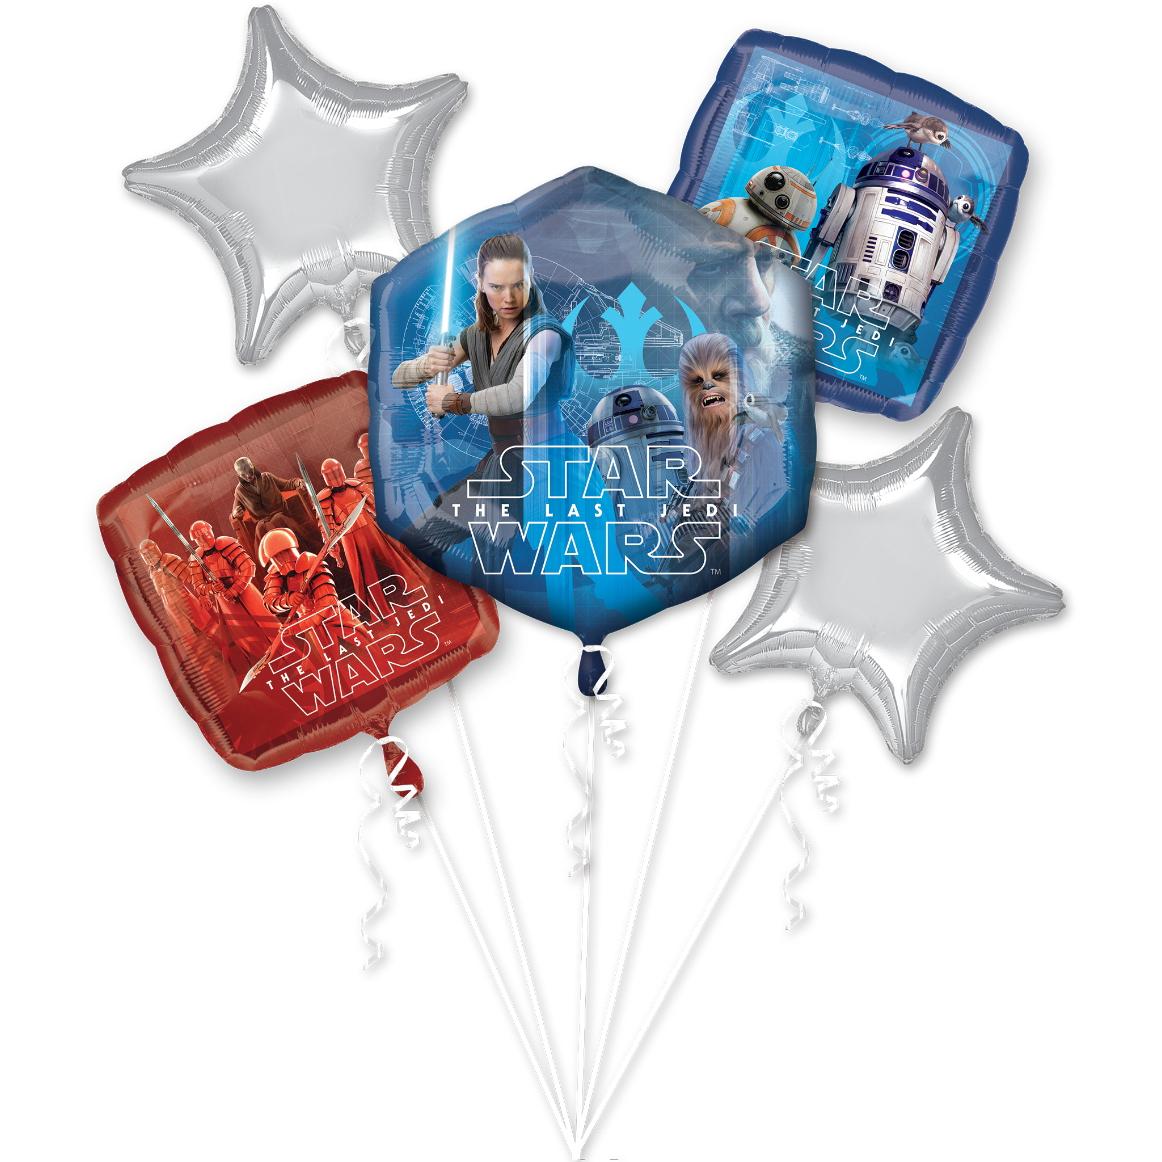 Star Wars The Last Jedi Balloon Bouquet 5pcs Balloons & Streamers - Party Centre